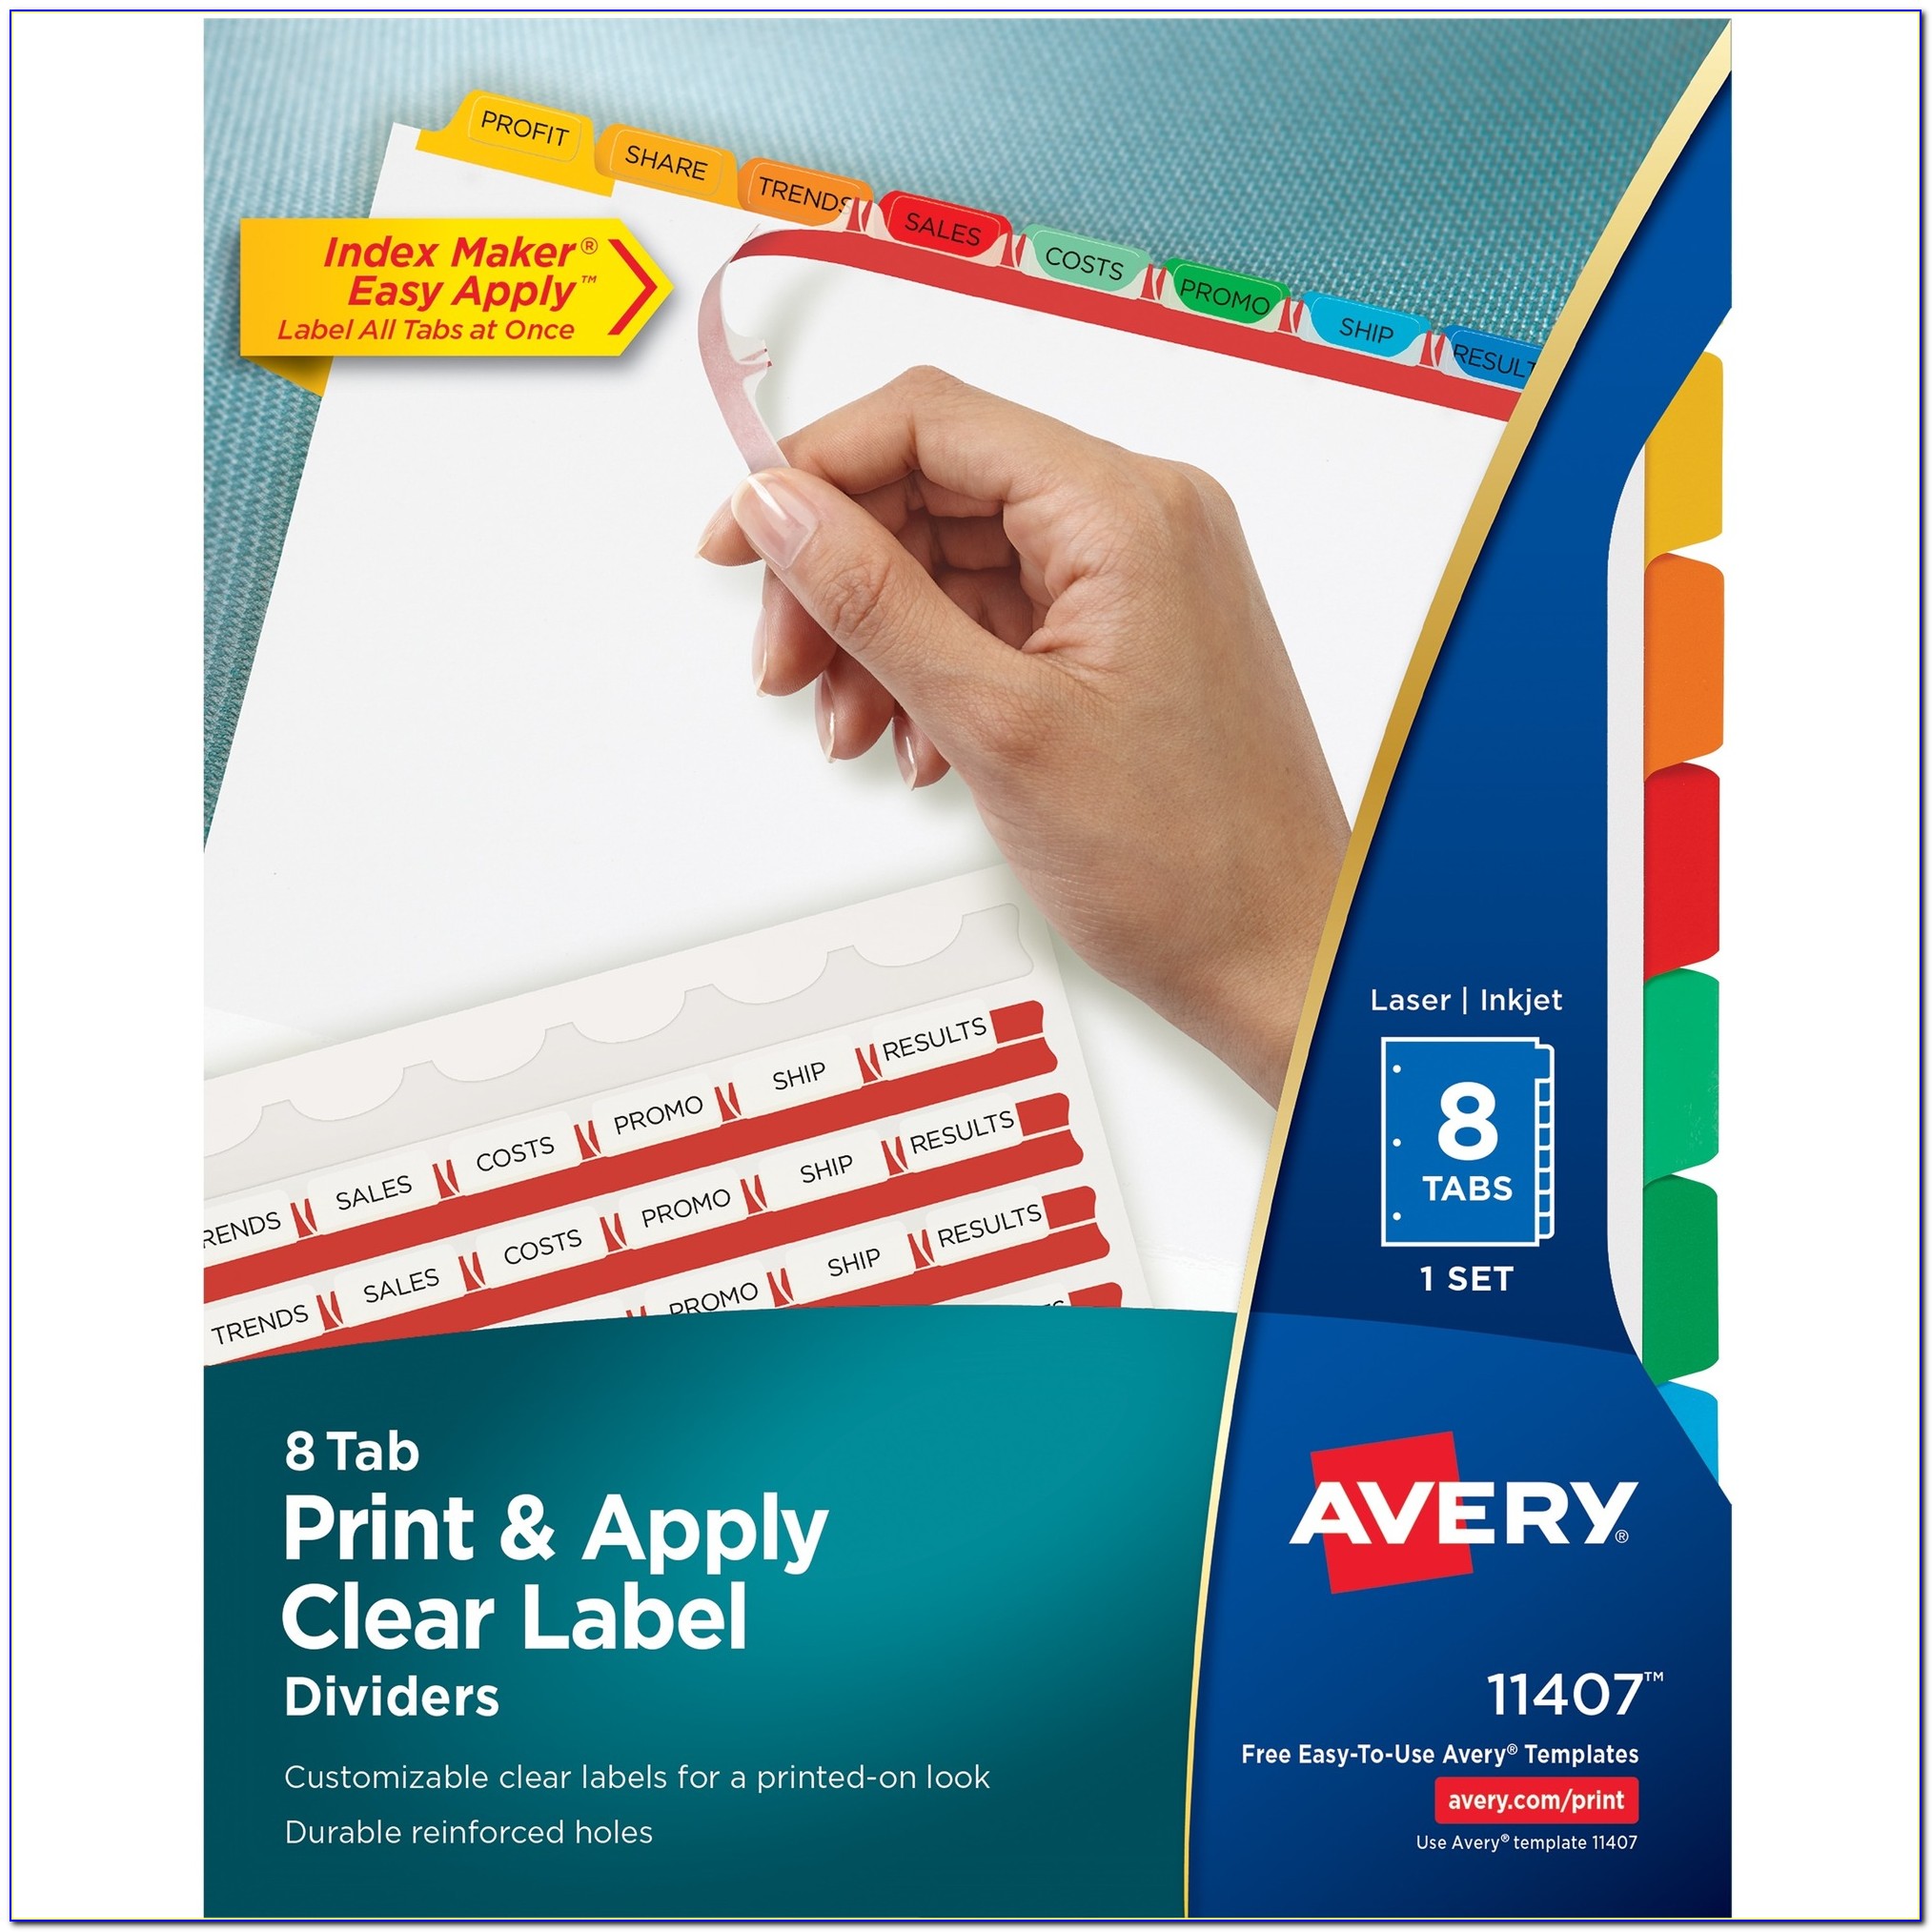 Avery 5 Tab Clear Label Template